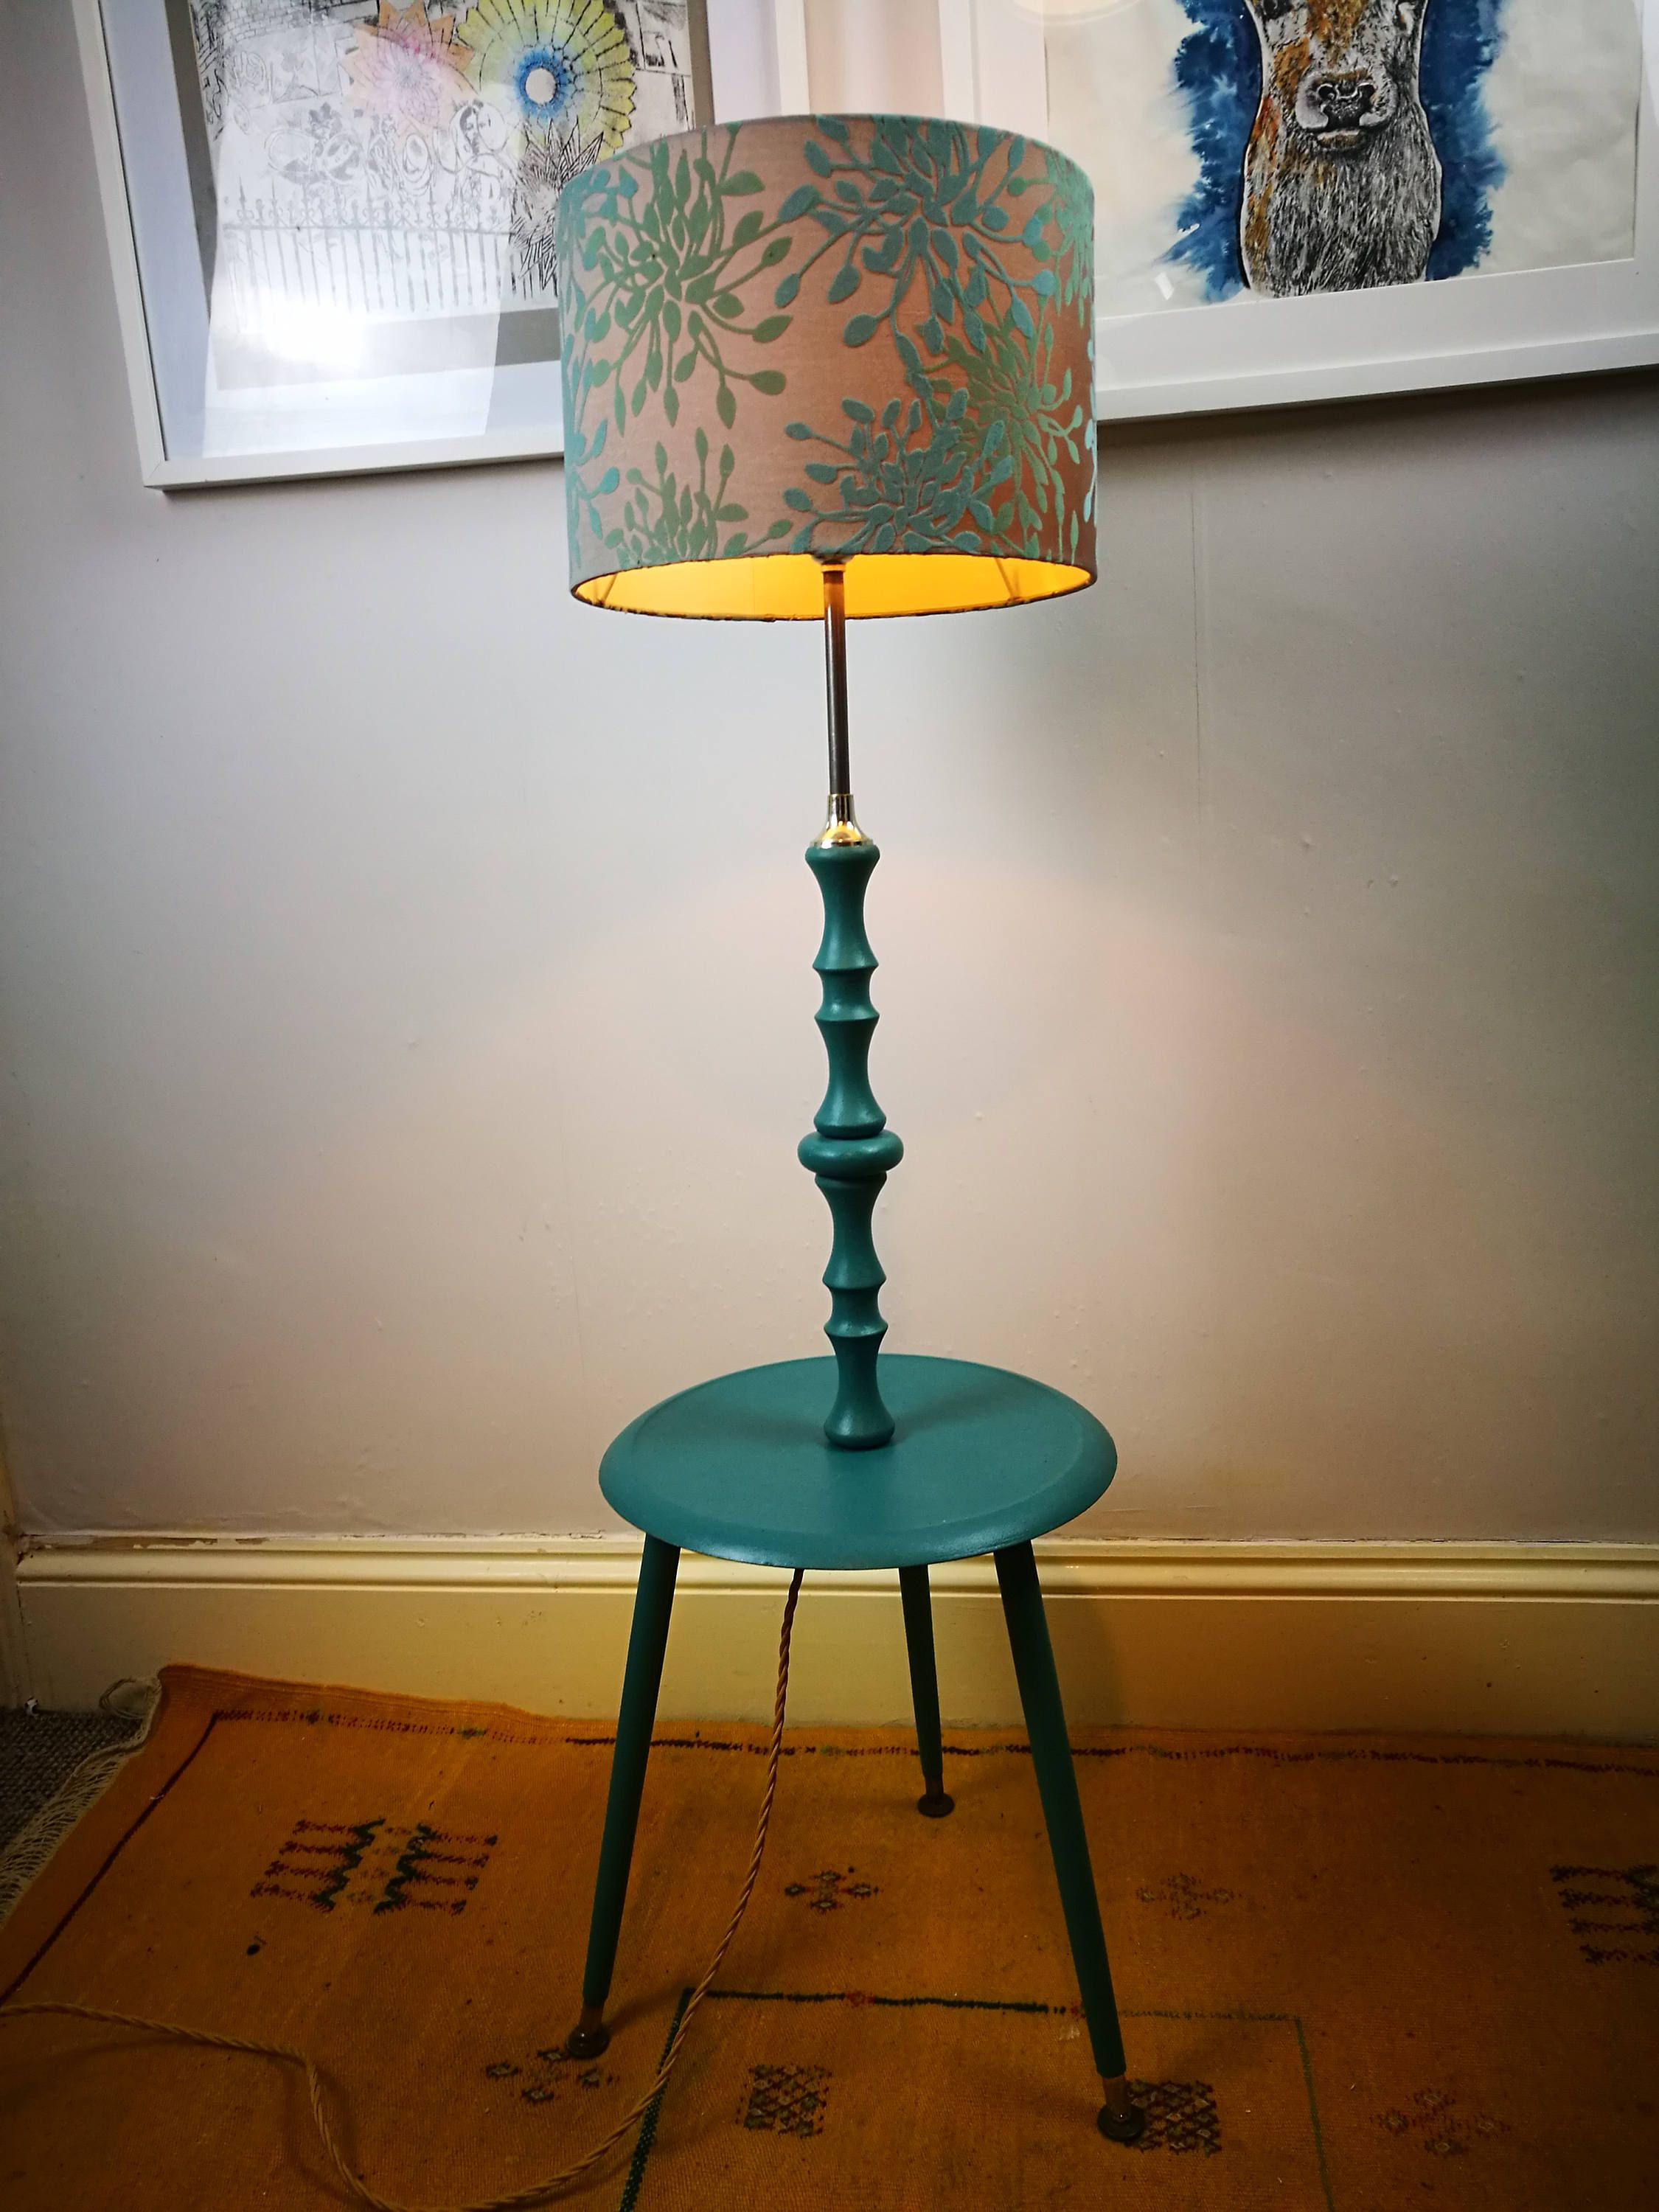 1960s Floor Lamp With Table Madeupsasha On Etsy in dimensions 2250 X 3000